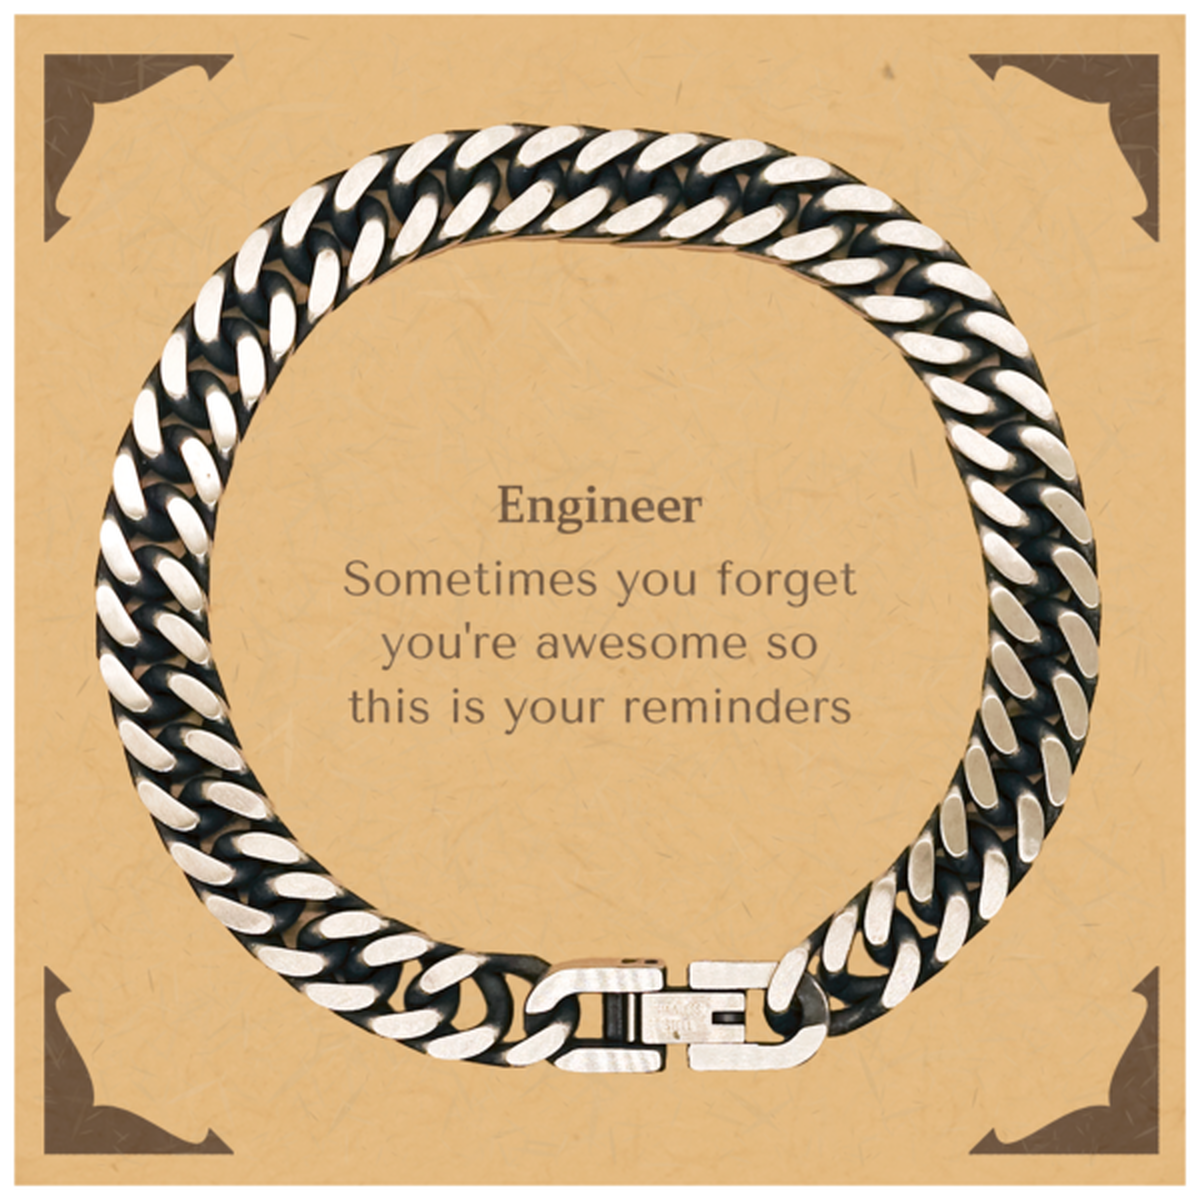 Sentimental Engineer Cuban Link Chain Bracelet, Engineer Sometimes you forget you're awesome so this is your reminders, Graduation Christmas Birthday Gifts for Engineer, Men, Women, Coworkers